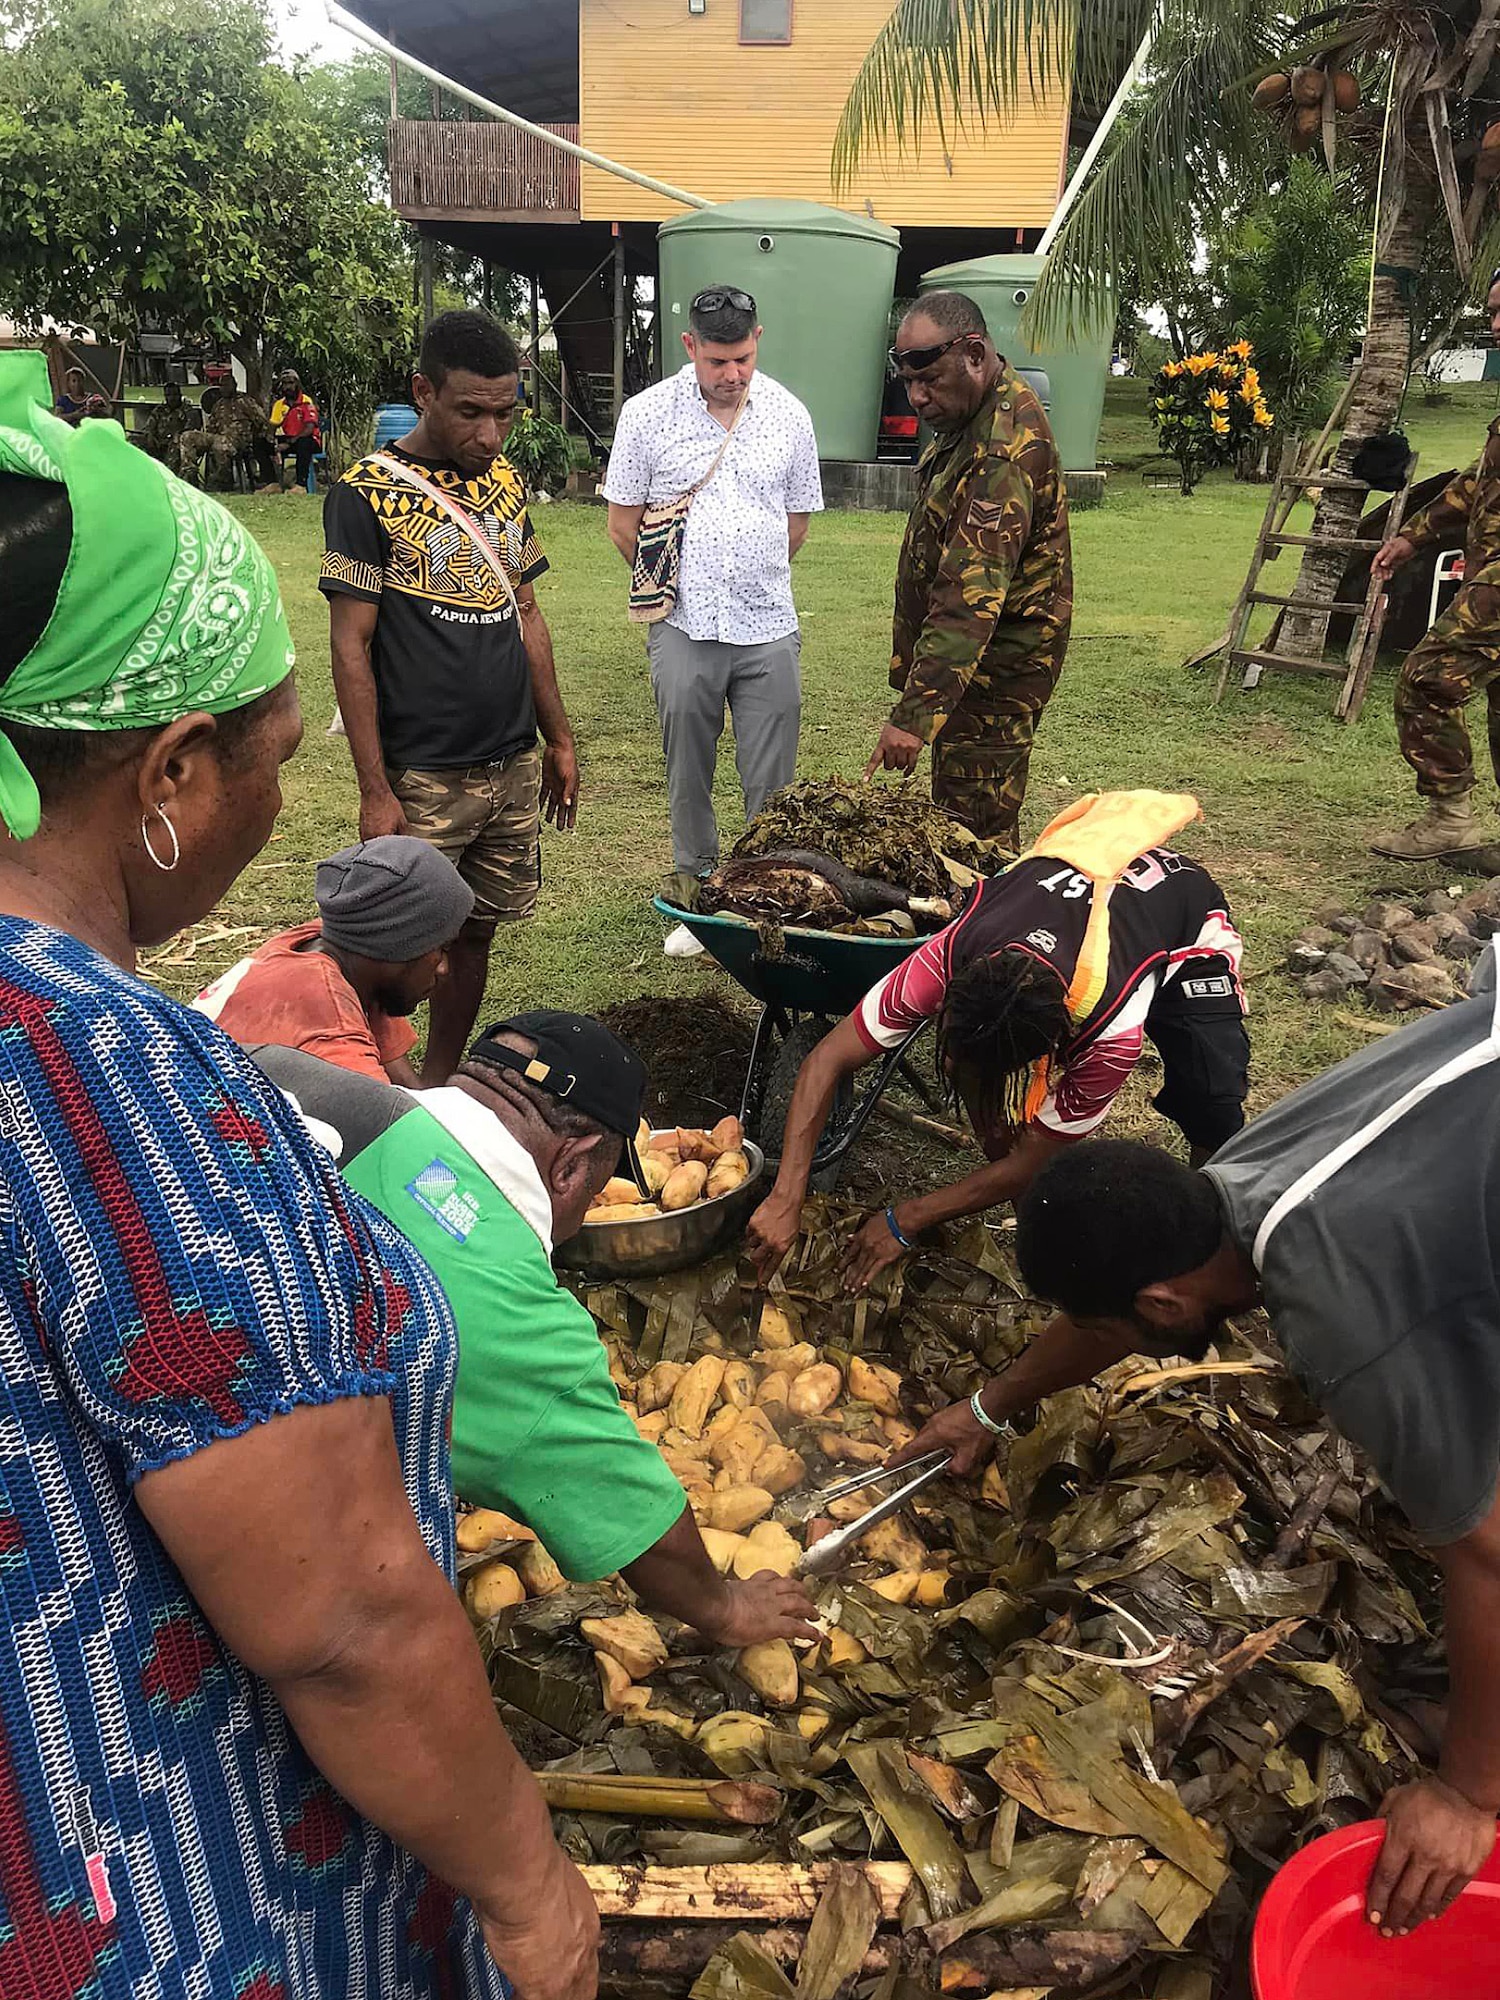 Villagers in Boregaina, the home of Maj. Gen. Mark Goina, chief of the Papua New Guinea Defence Force, extract sweet potatoes and roasted meat from a cooking pit during a traditional mumu, or ceremonial meal, Dec. 3, 2022. The mumu was prepared in honor of a Wisconsin National Guard delegation to Papua New Guinea for the official signing of a State Partnership Program agreement.